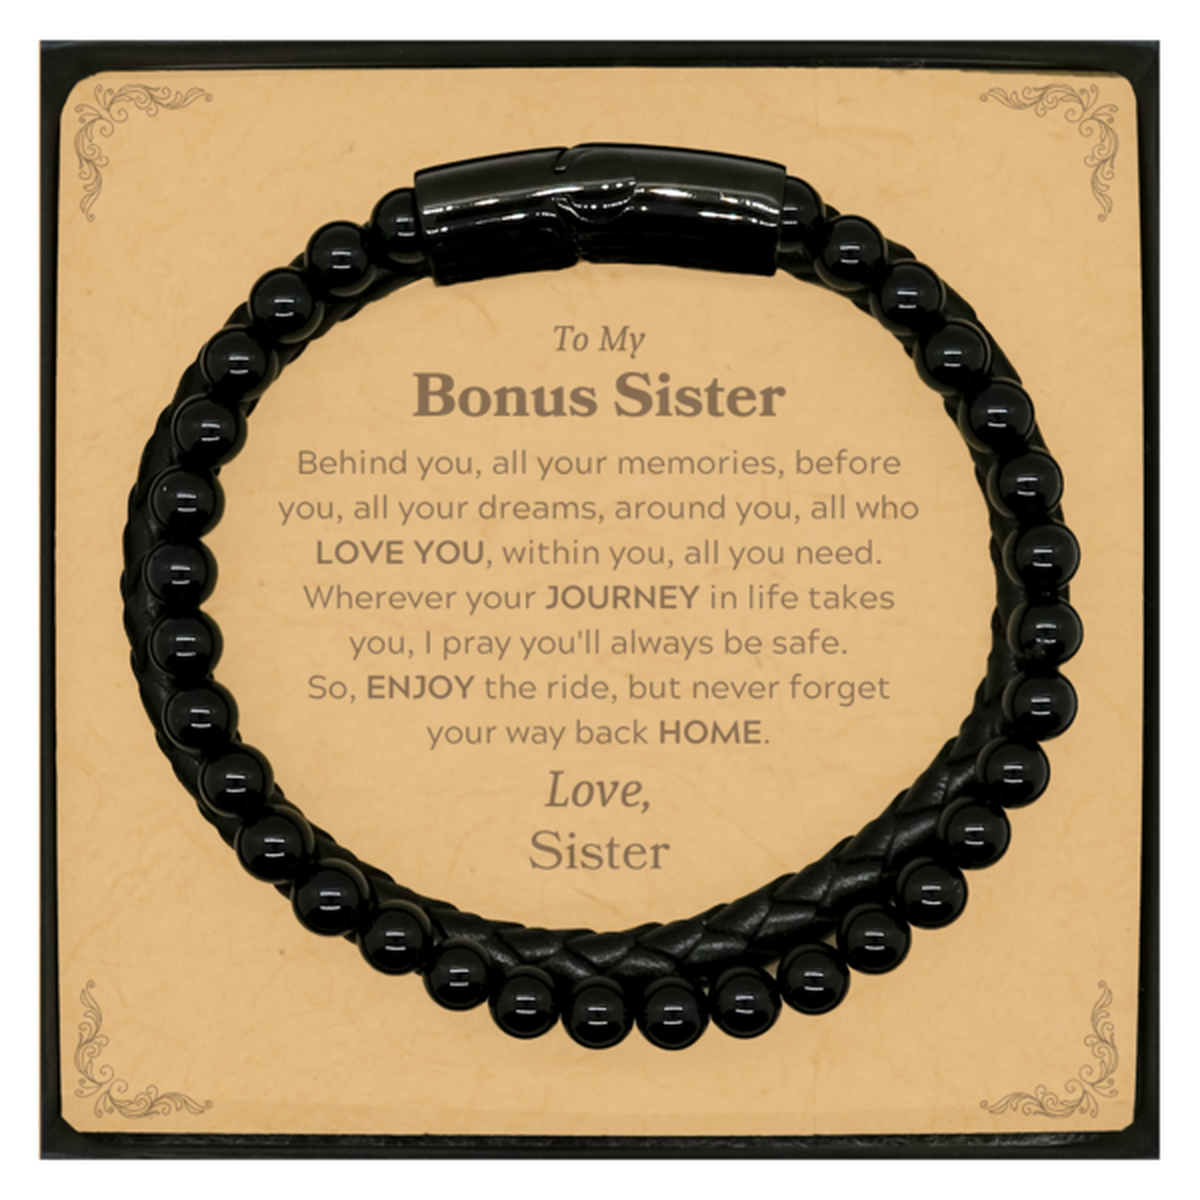 To My Bonus Sister Graduation Gifts from Sister, Bonus Sister Stone Leather Bracelets Christmas Birthday Gifts for Bonus Sister Behind you, all your memories, before you, all your dreams. Love, Sister